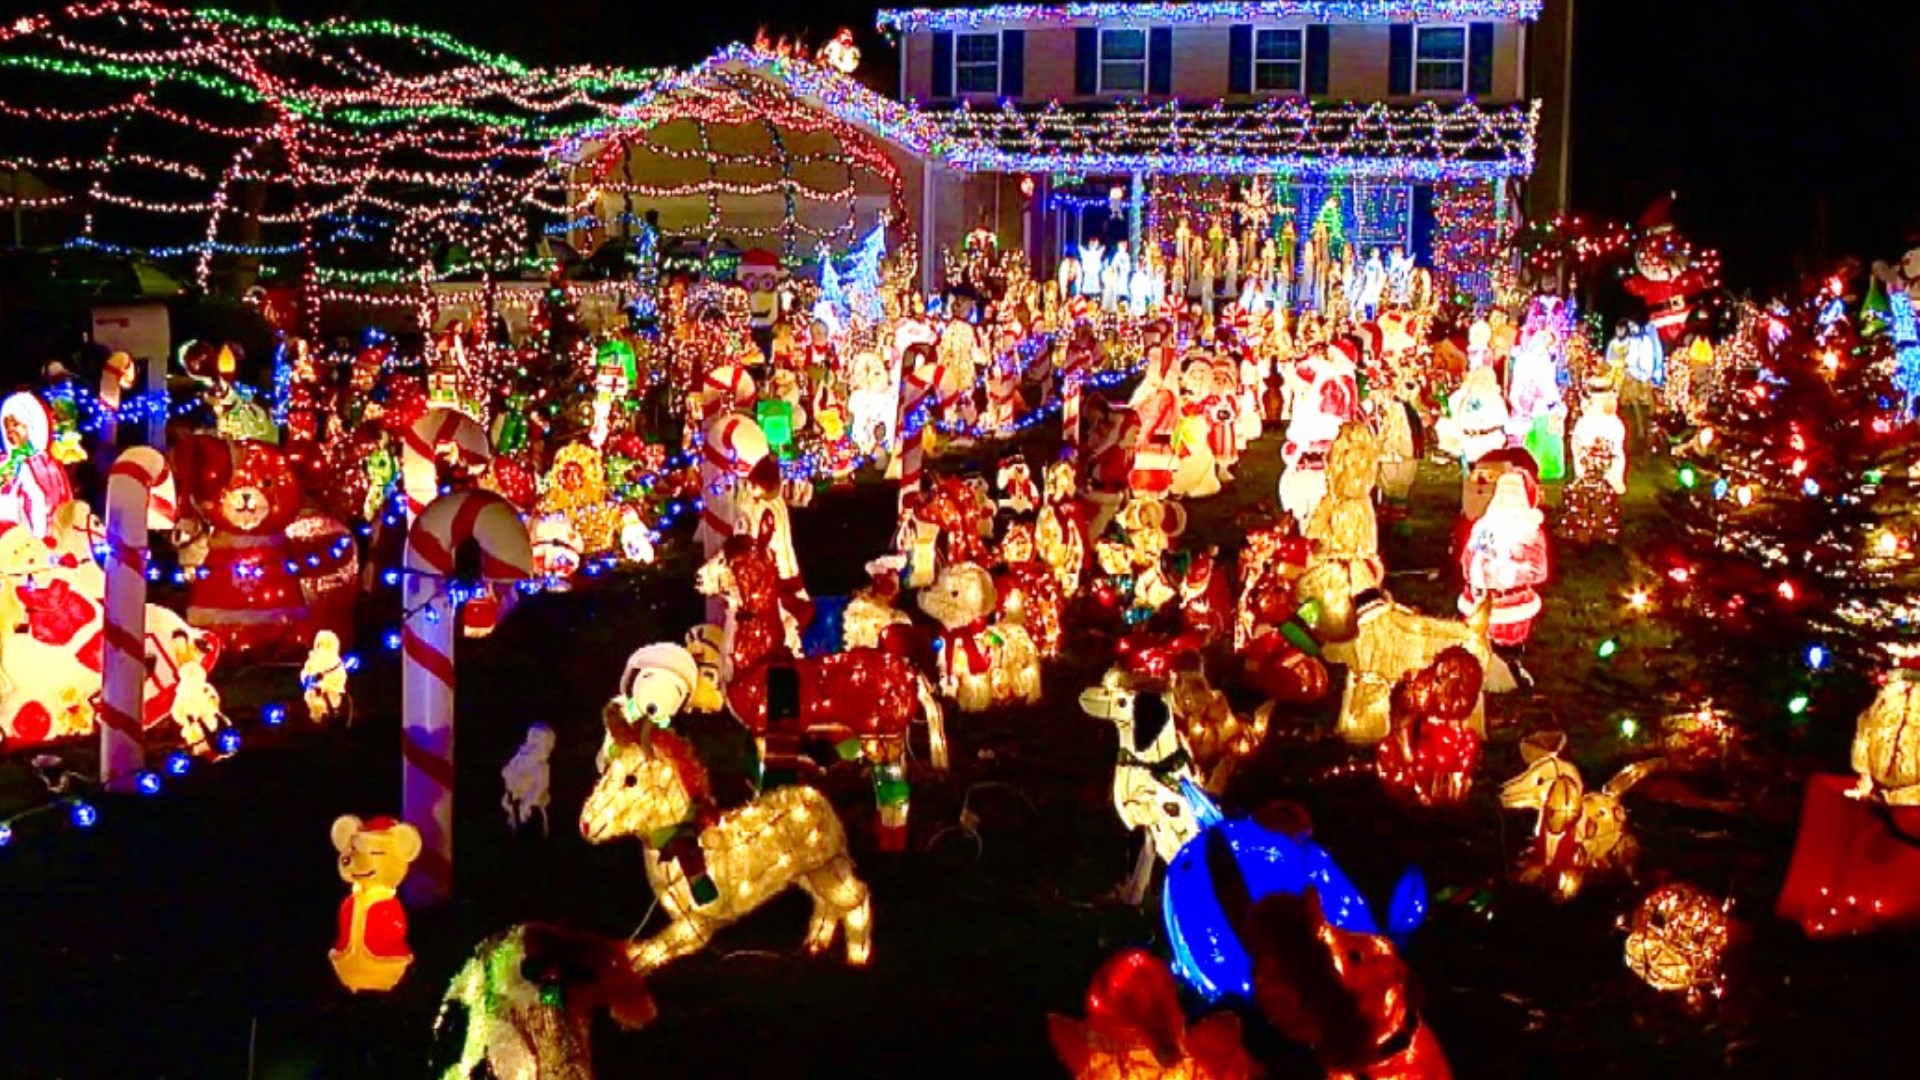 Each year, the Elstons make a commitment to brighten the moods in their Muncie neighborhood with their holiday lights display.